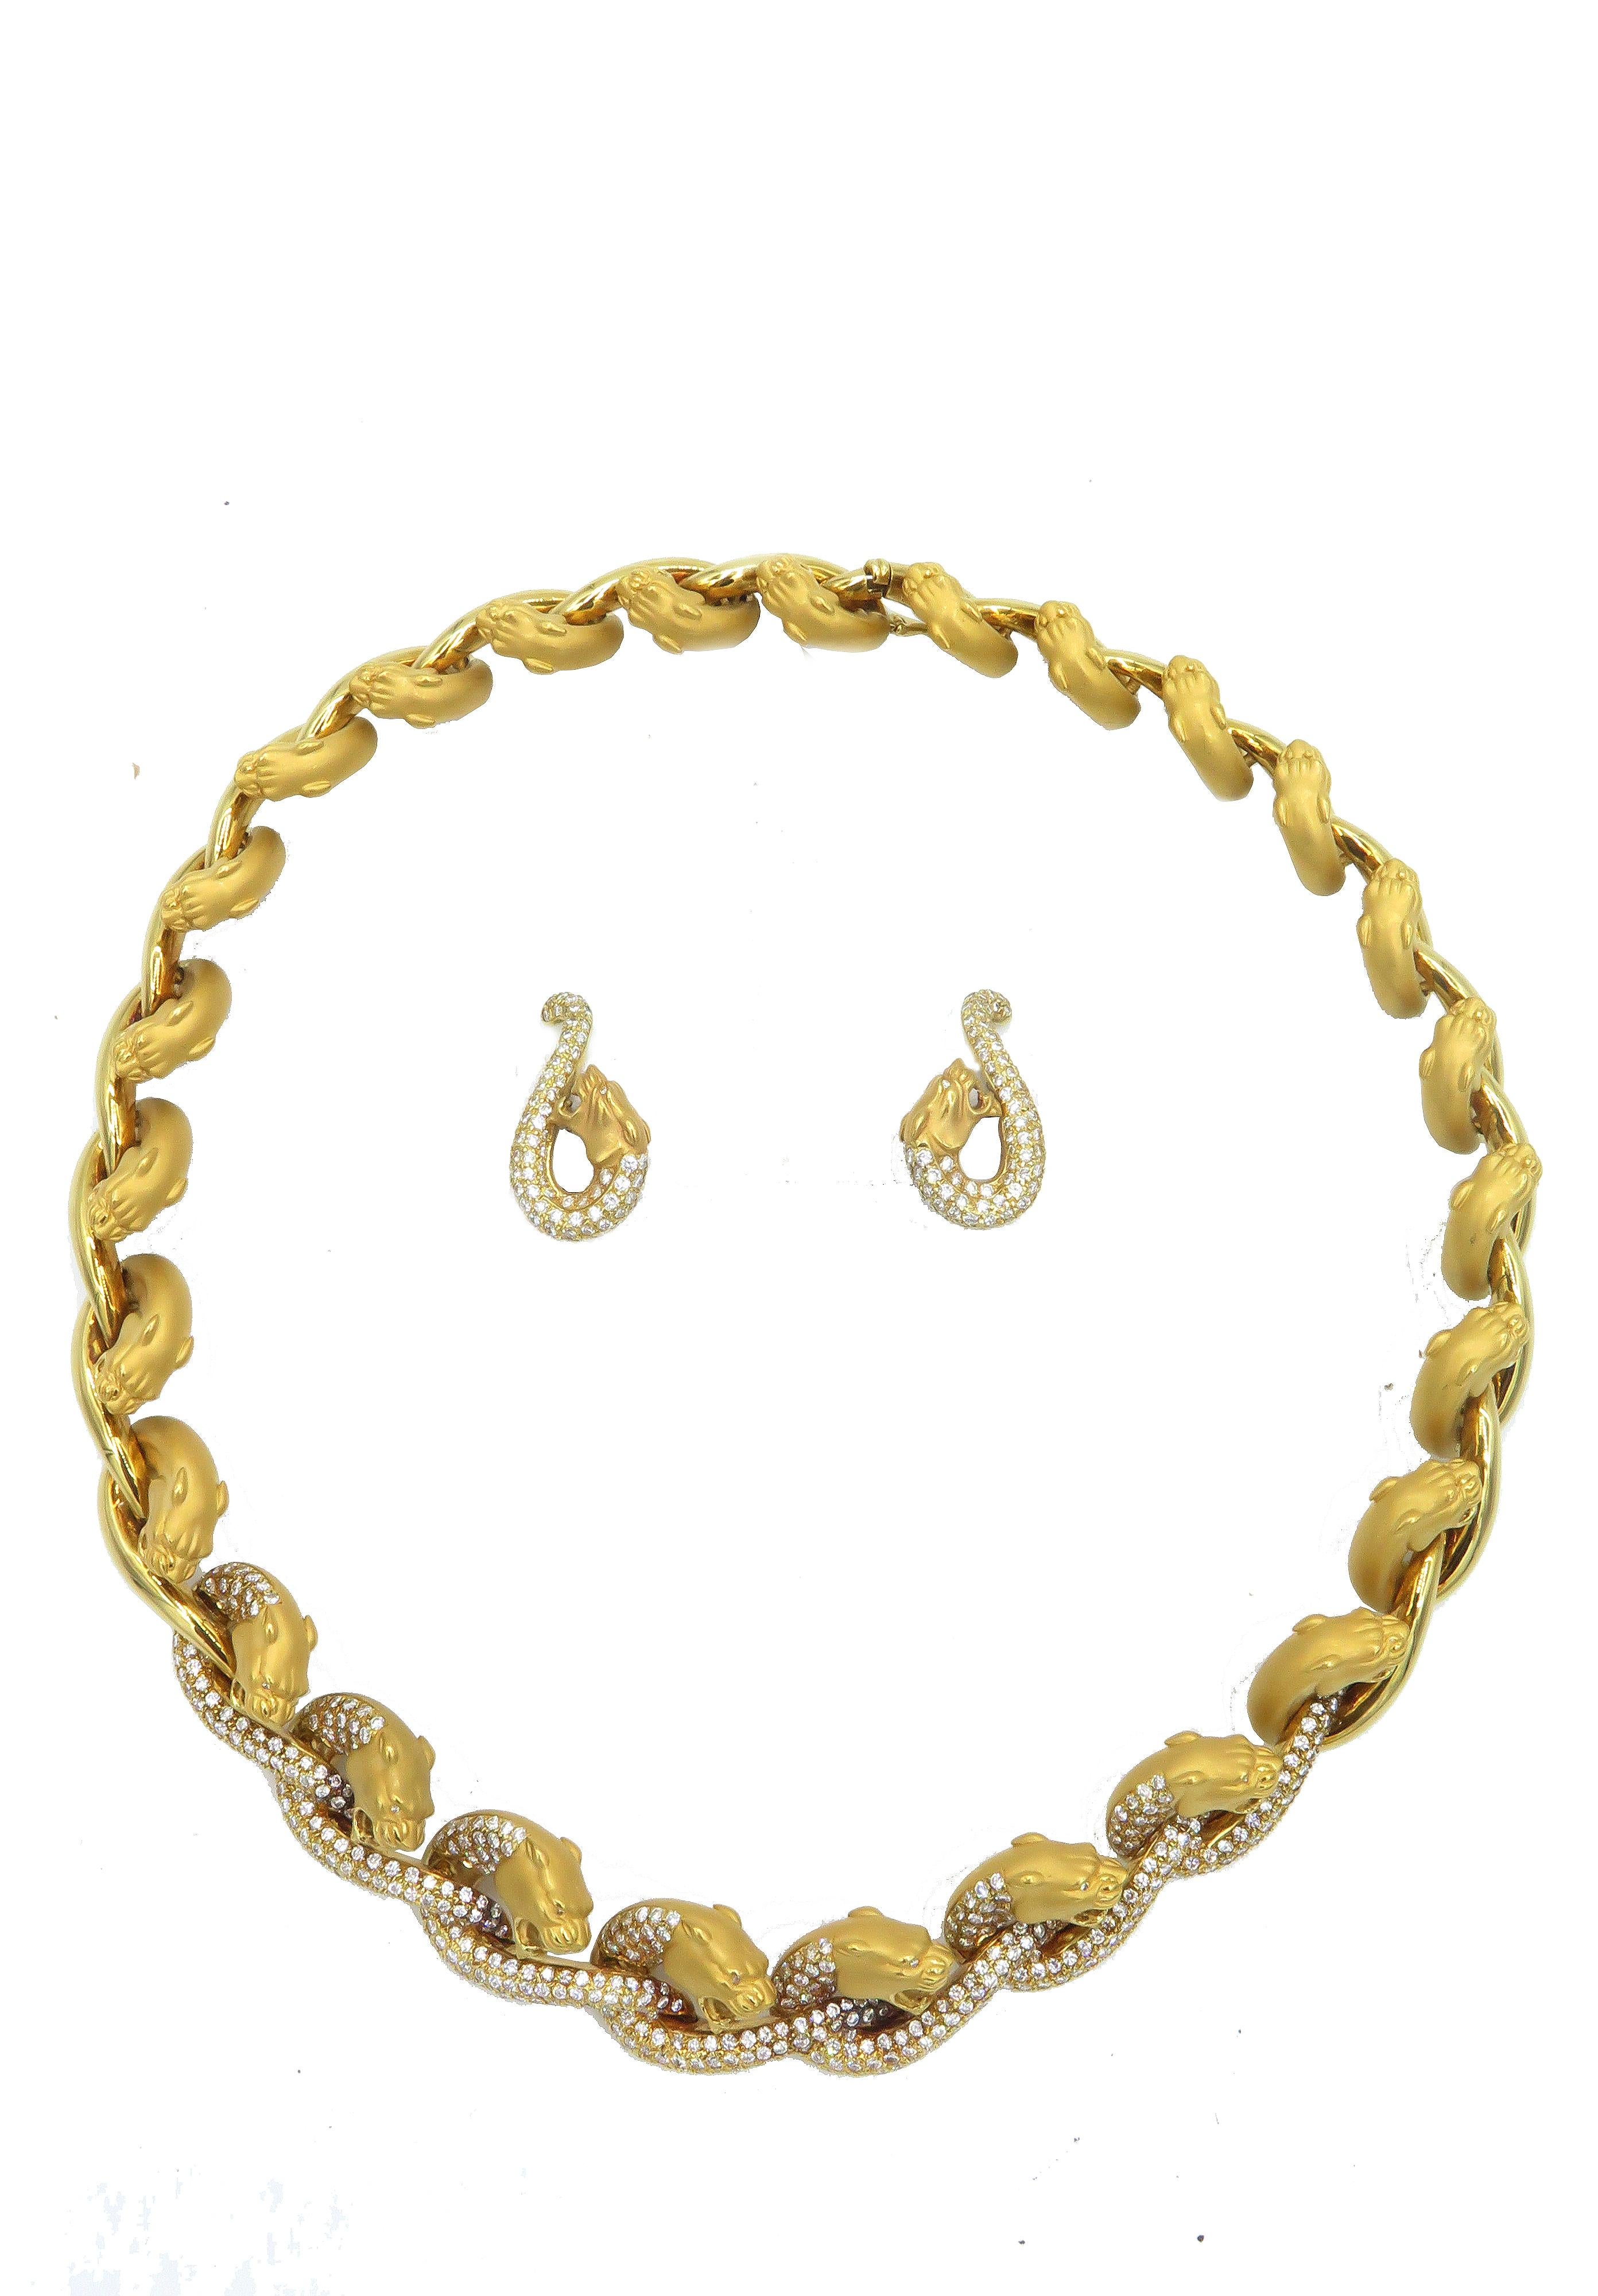 If you love the distinct golden glow of Spanish gold, you will lust after this magnificent Cerrera y Cerrera necklace and earring set. Fashioned in the Carrera y Carrera iconic tiger design, 18k yellow gold and precious diamonds come together In